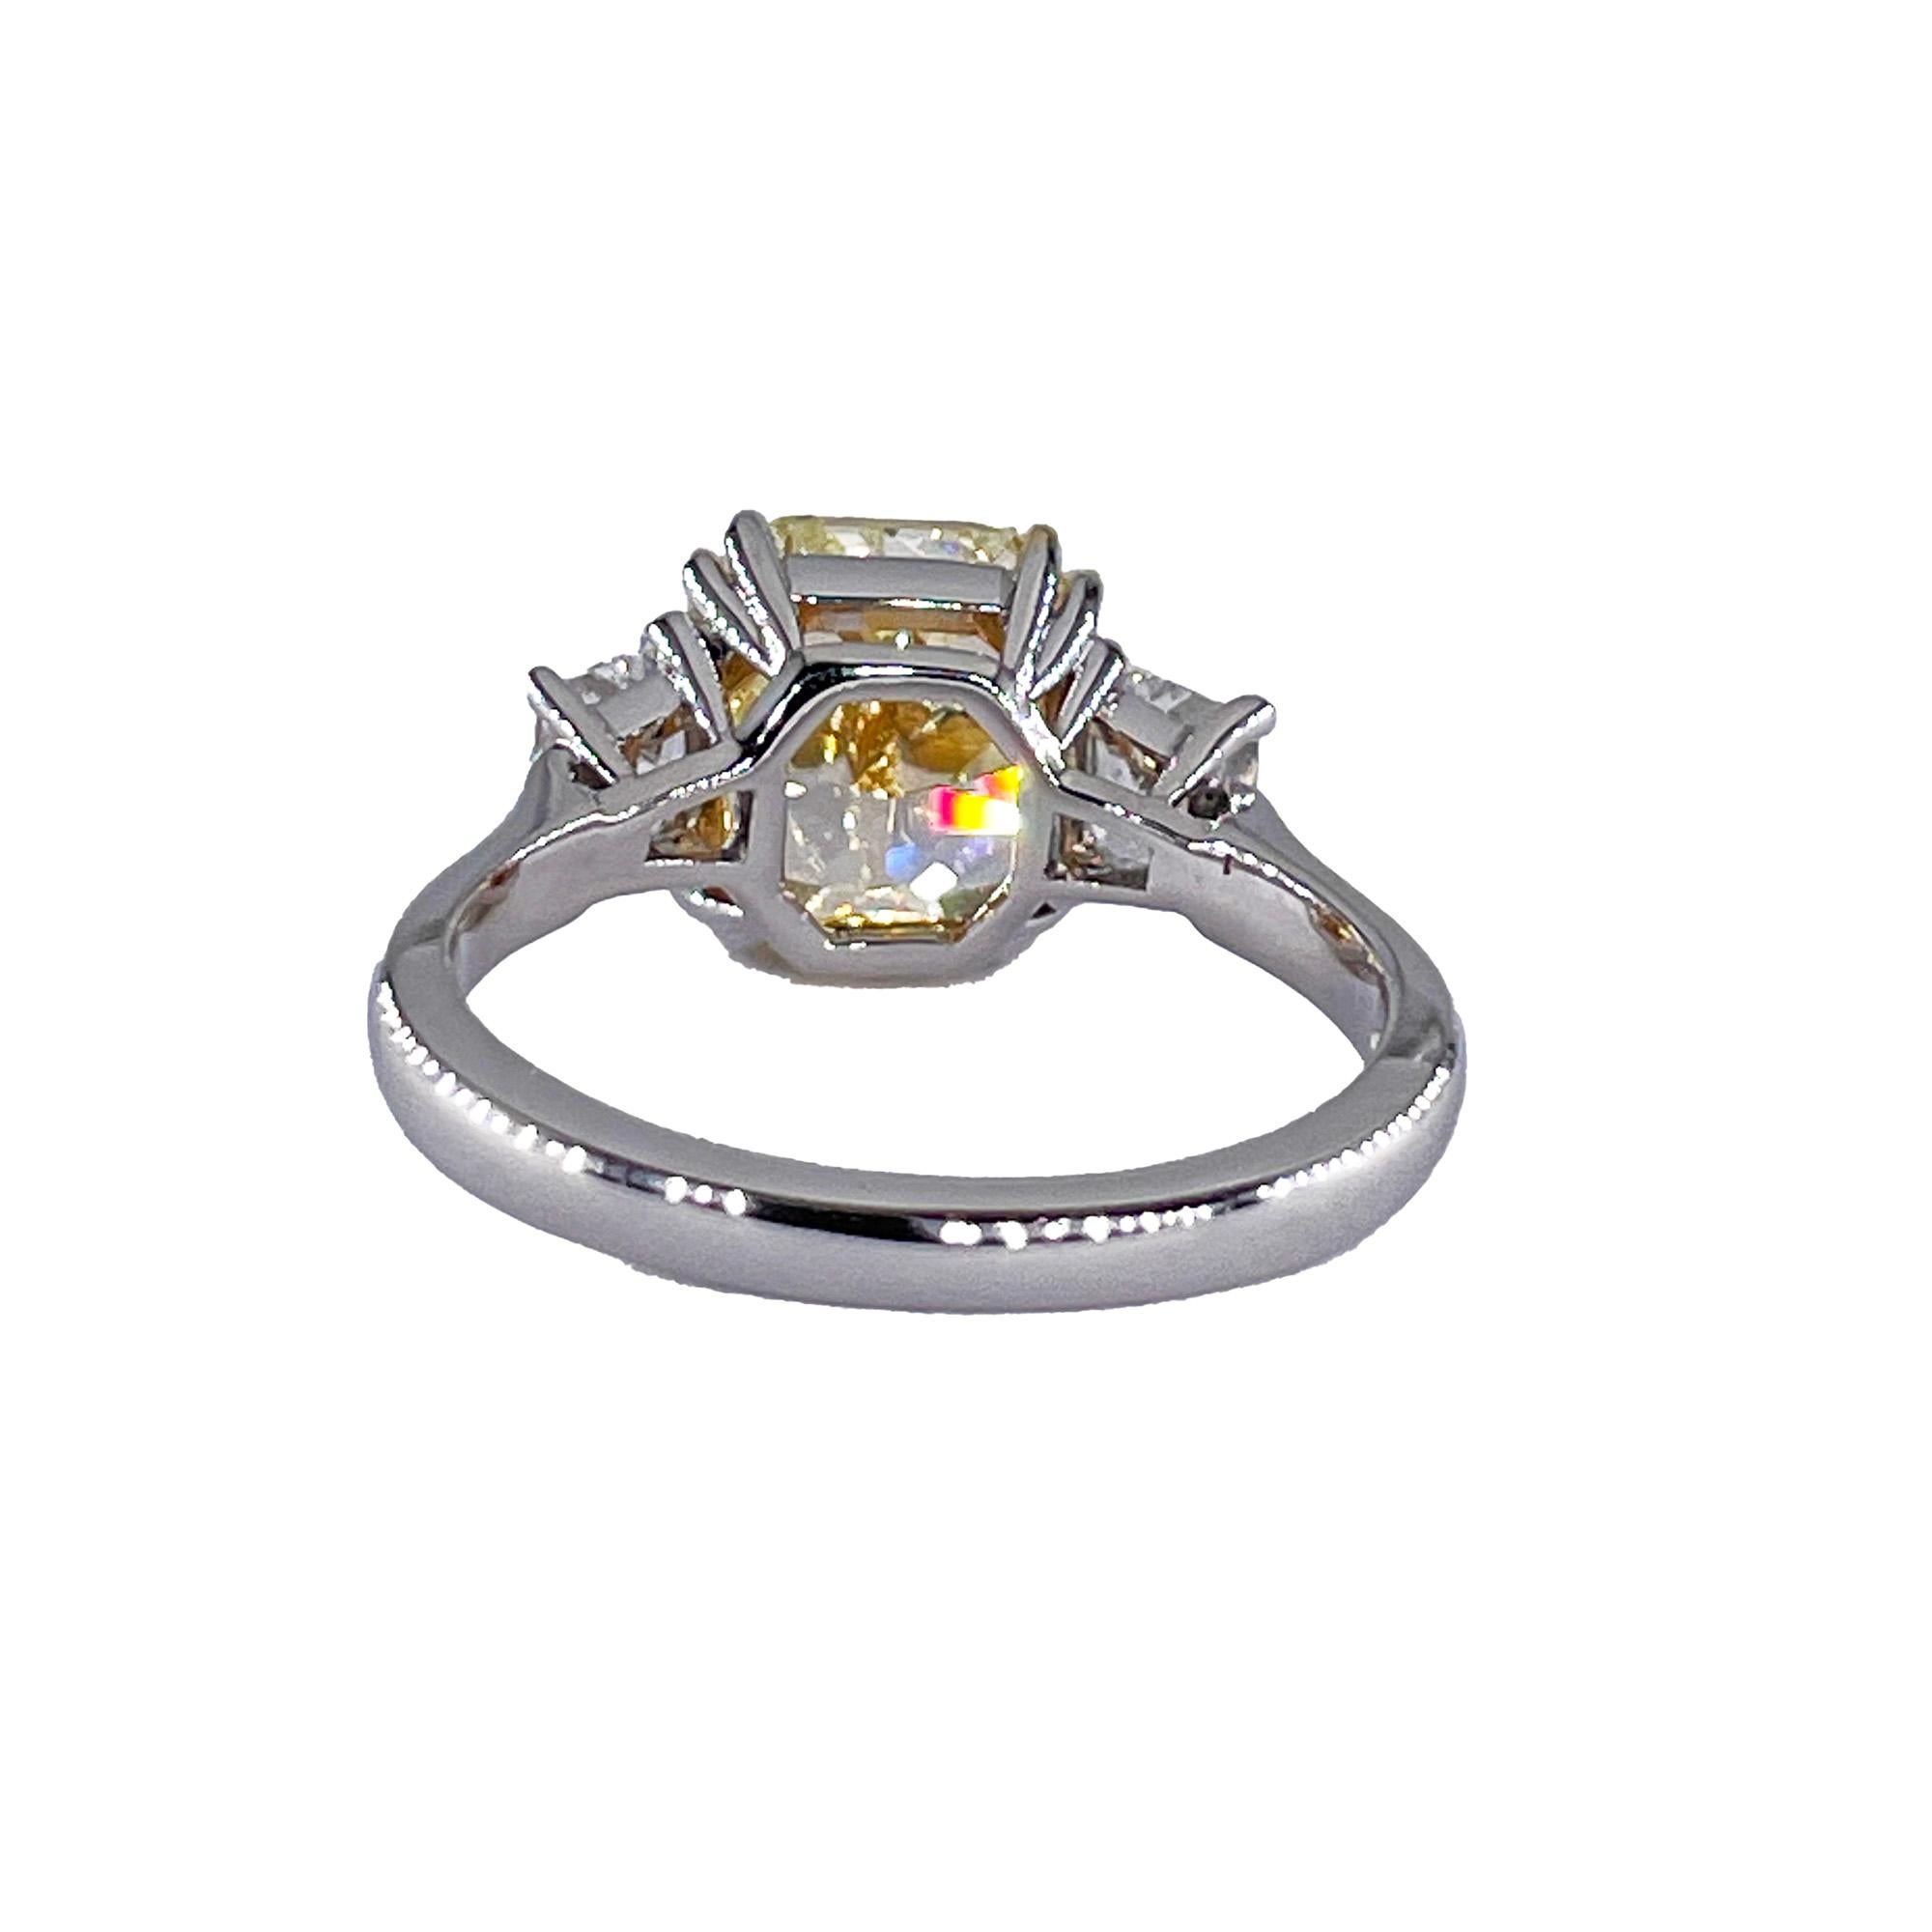 Vintage Royal Asscher GIA 4.32ctw Natural Fancy YELLOW Radiant Cut Diamond Ring For Sale 4